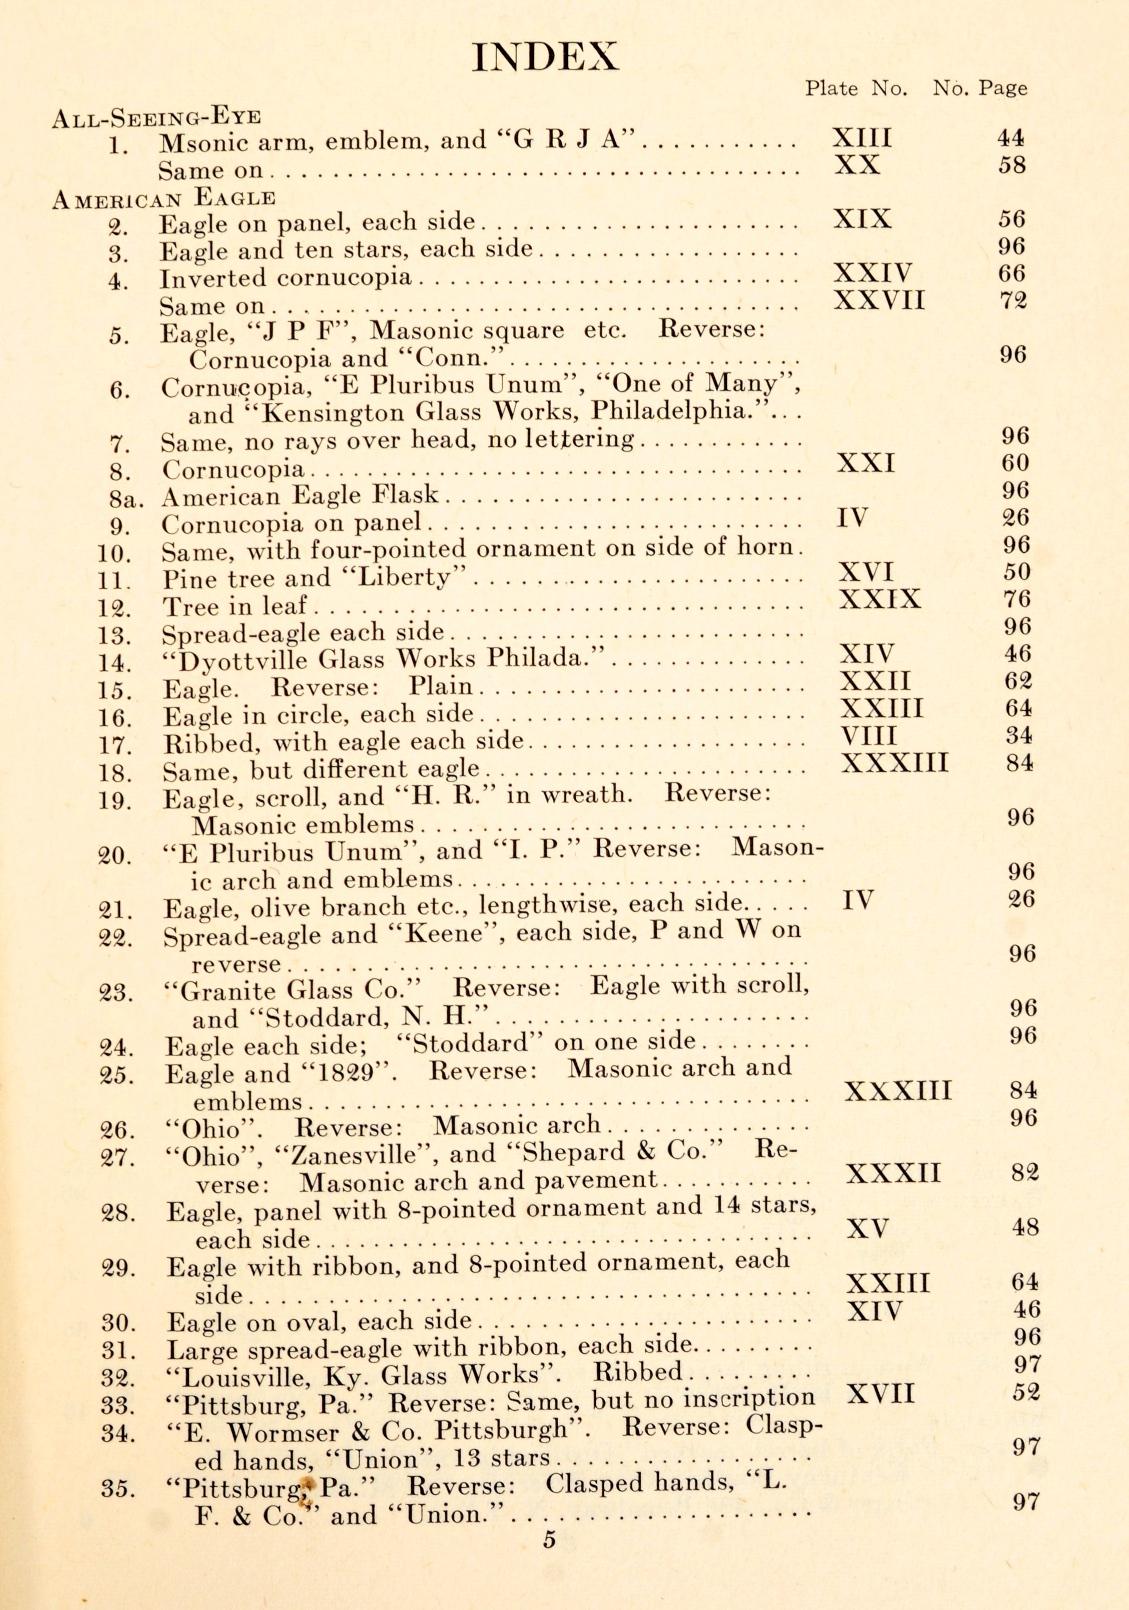 Early 20th Century Check List of Early American Bottles And Flasks by Stephen Van Rensselaer